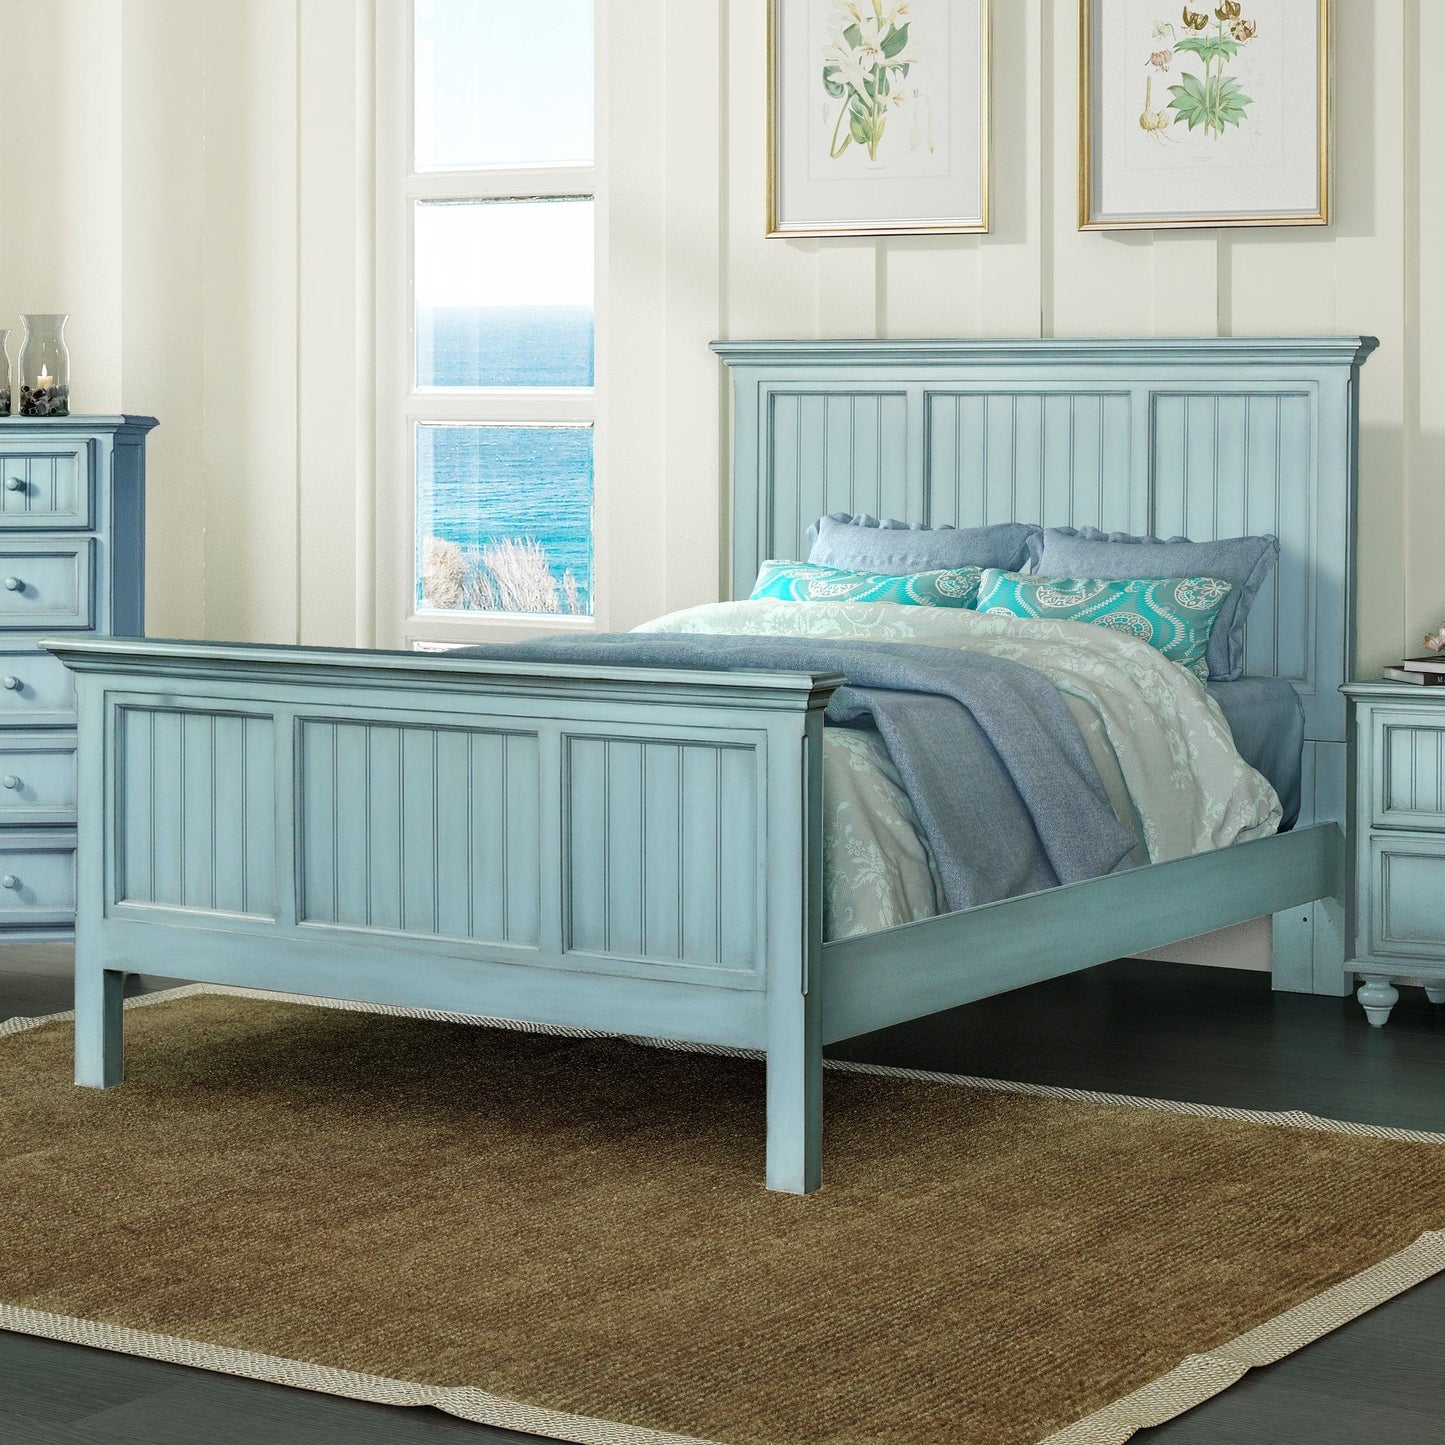 Sea Winds Trading Monaco Queen Bed B818QBED Indoor Sea Winds Trading Co 